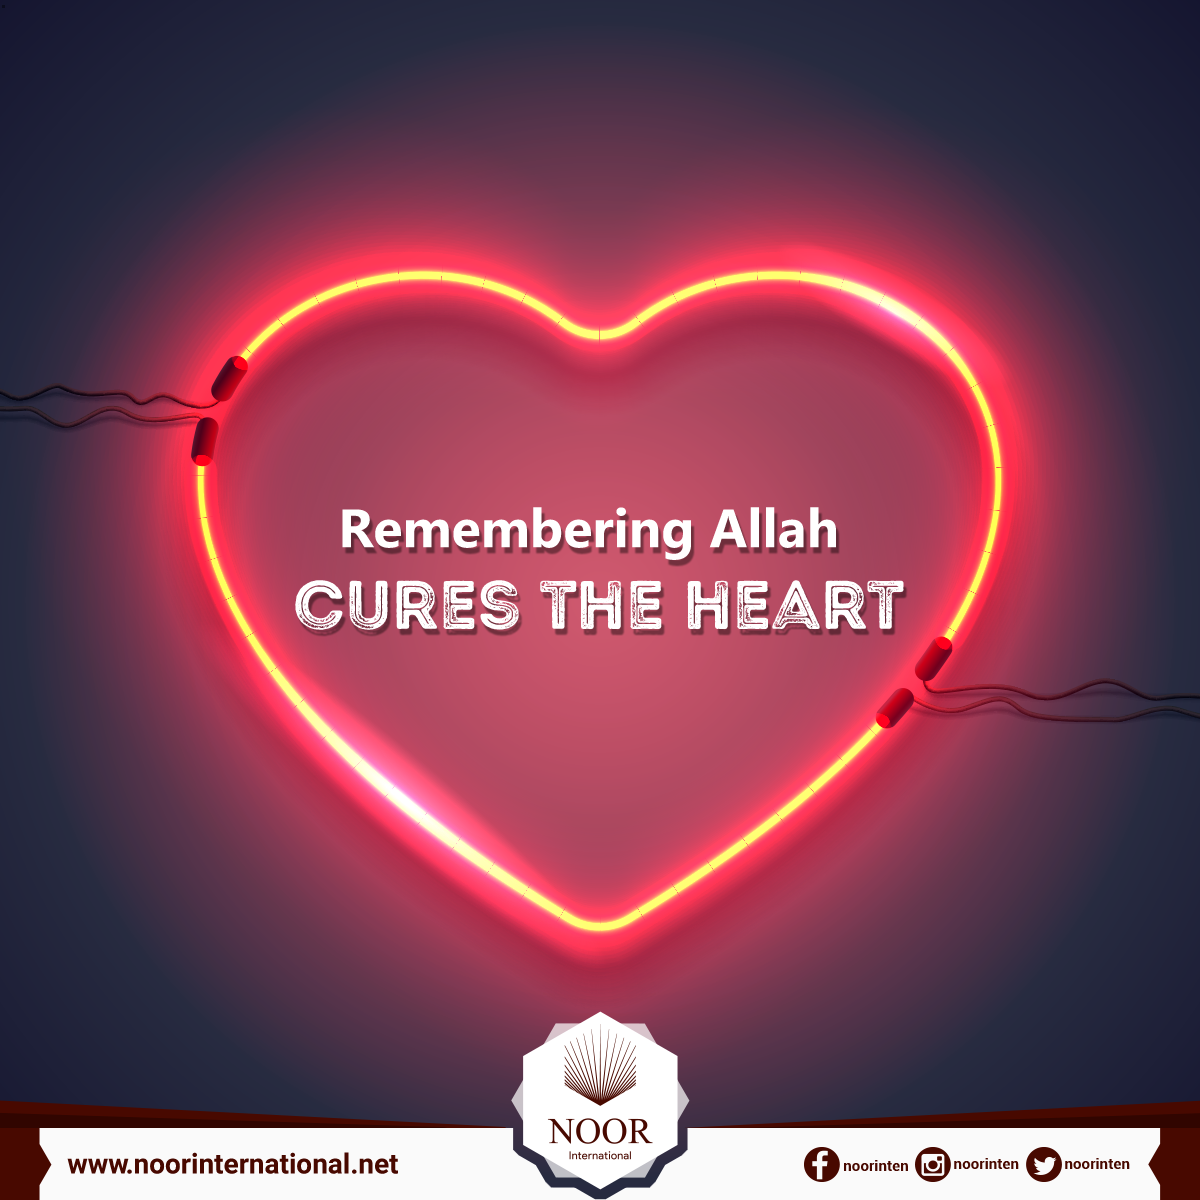 Remembering Allah cures the heart